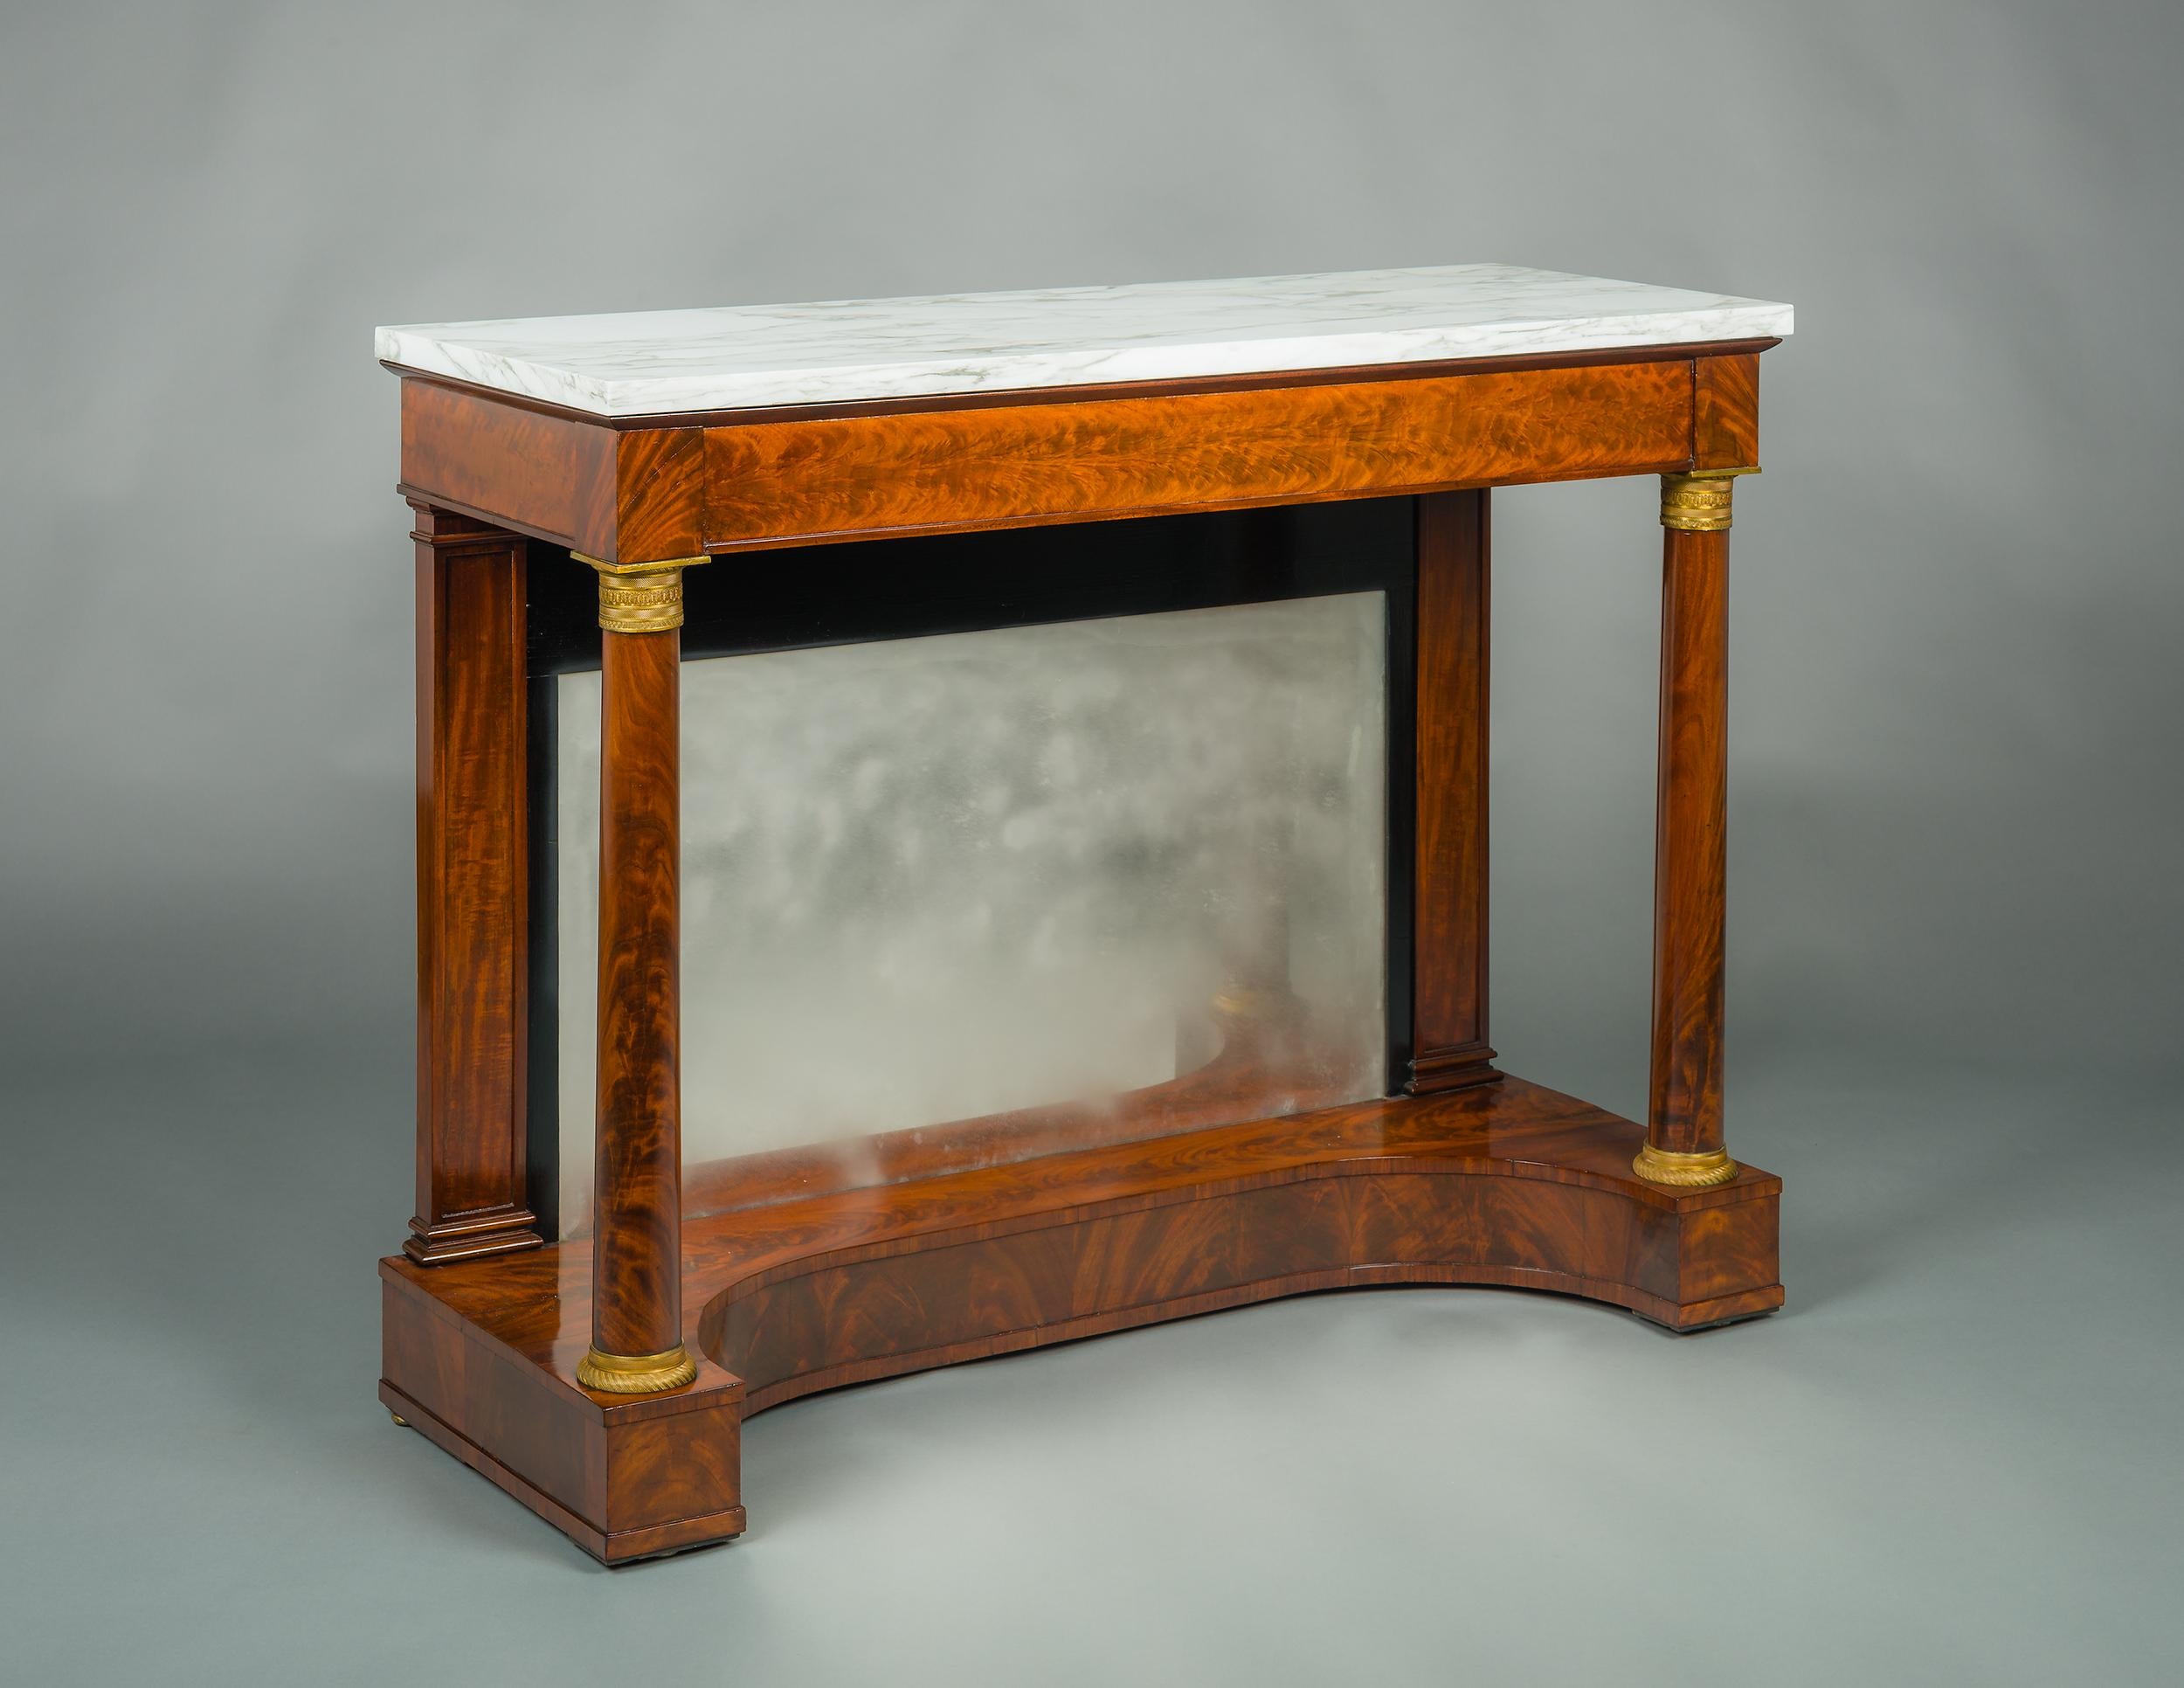 Pair Neo-Classical Pier tables, about 1825
Boston
Each, mahogany (secondary woods: chestnut and pine), partially ebonized, with ormolu mounts and marble tops
Each, 37 1/8 in. high x 47 7/8 in. wide x 17 3/4 in. deep

EX COLL.: Henrietta Atwater